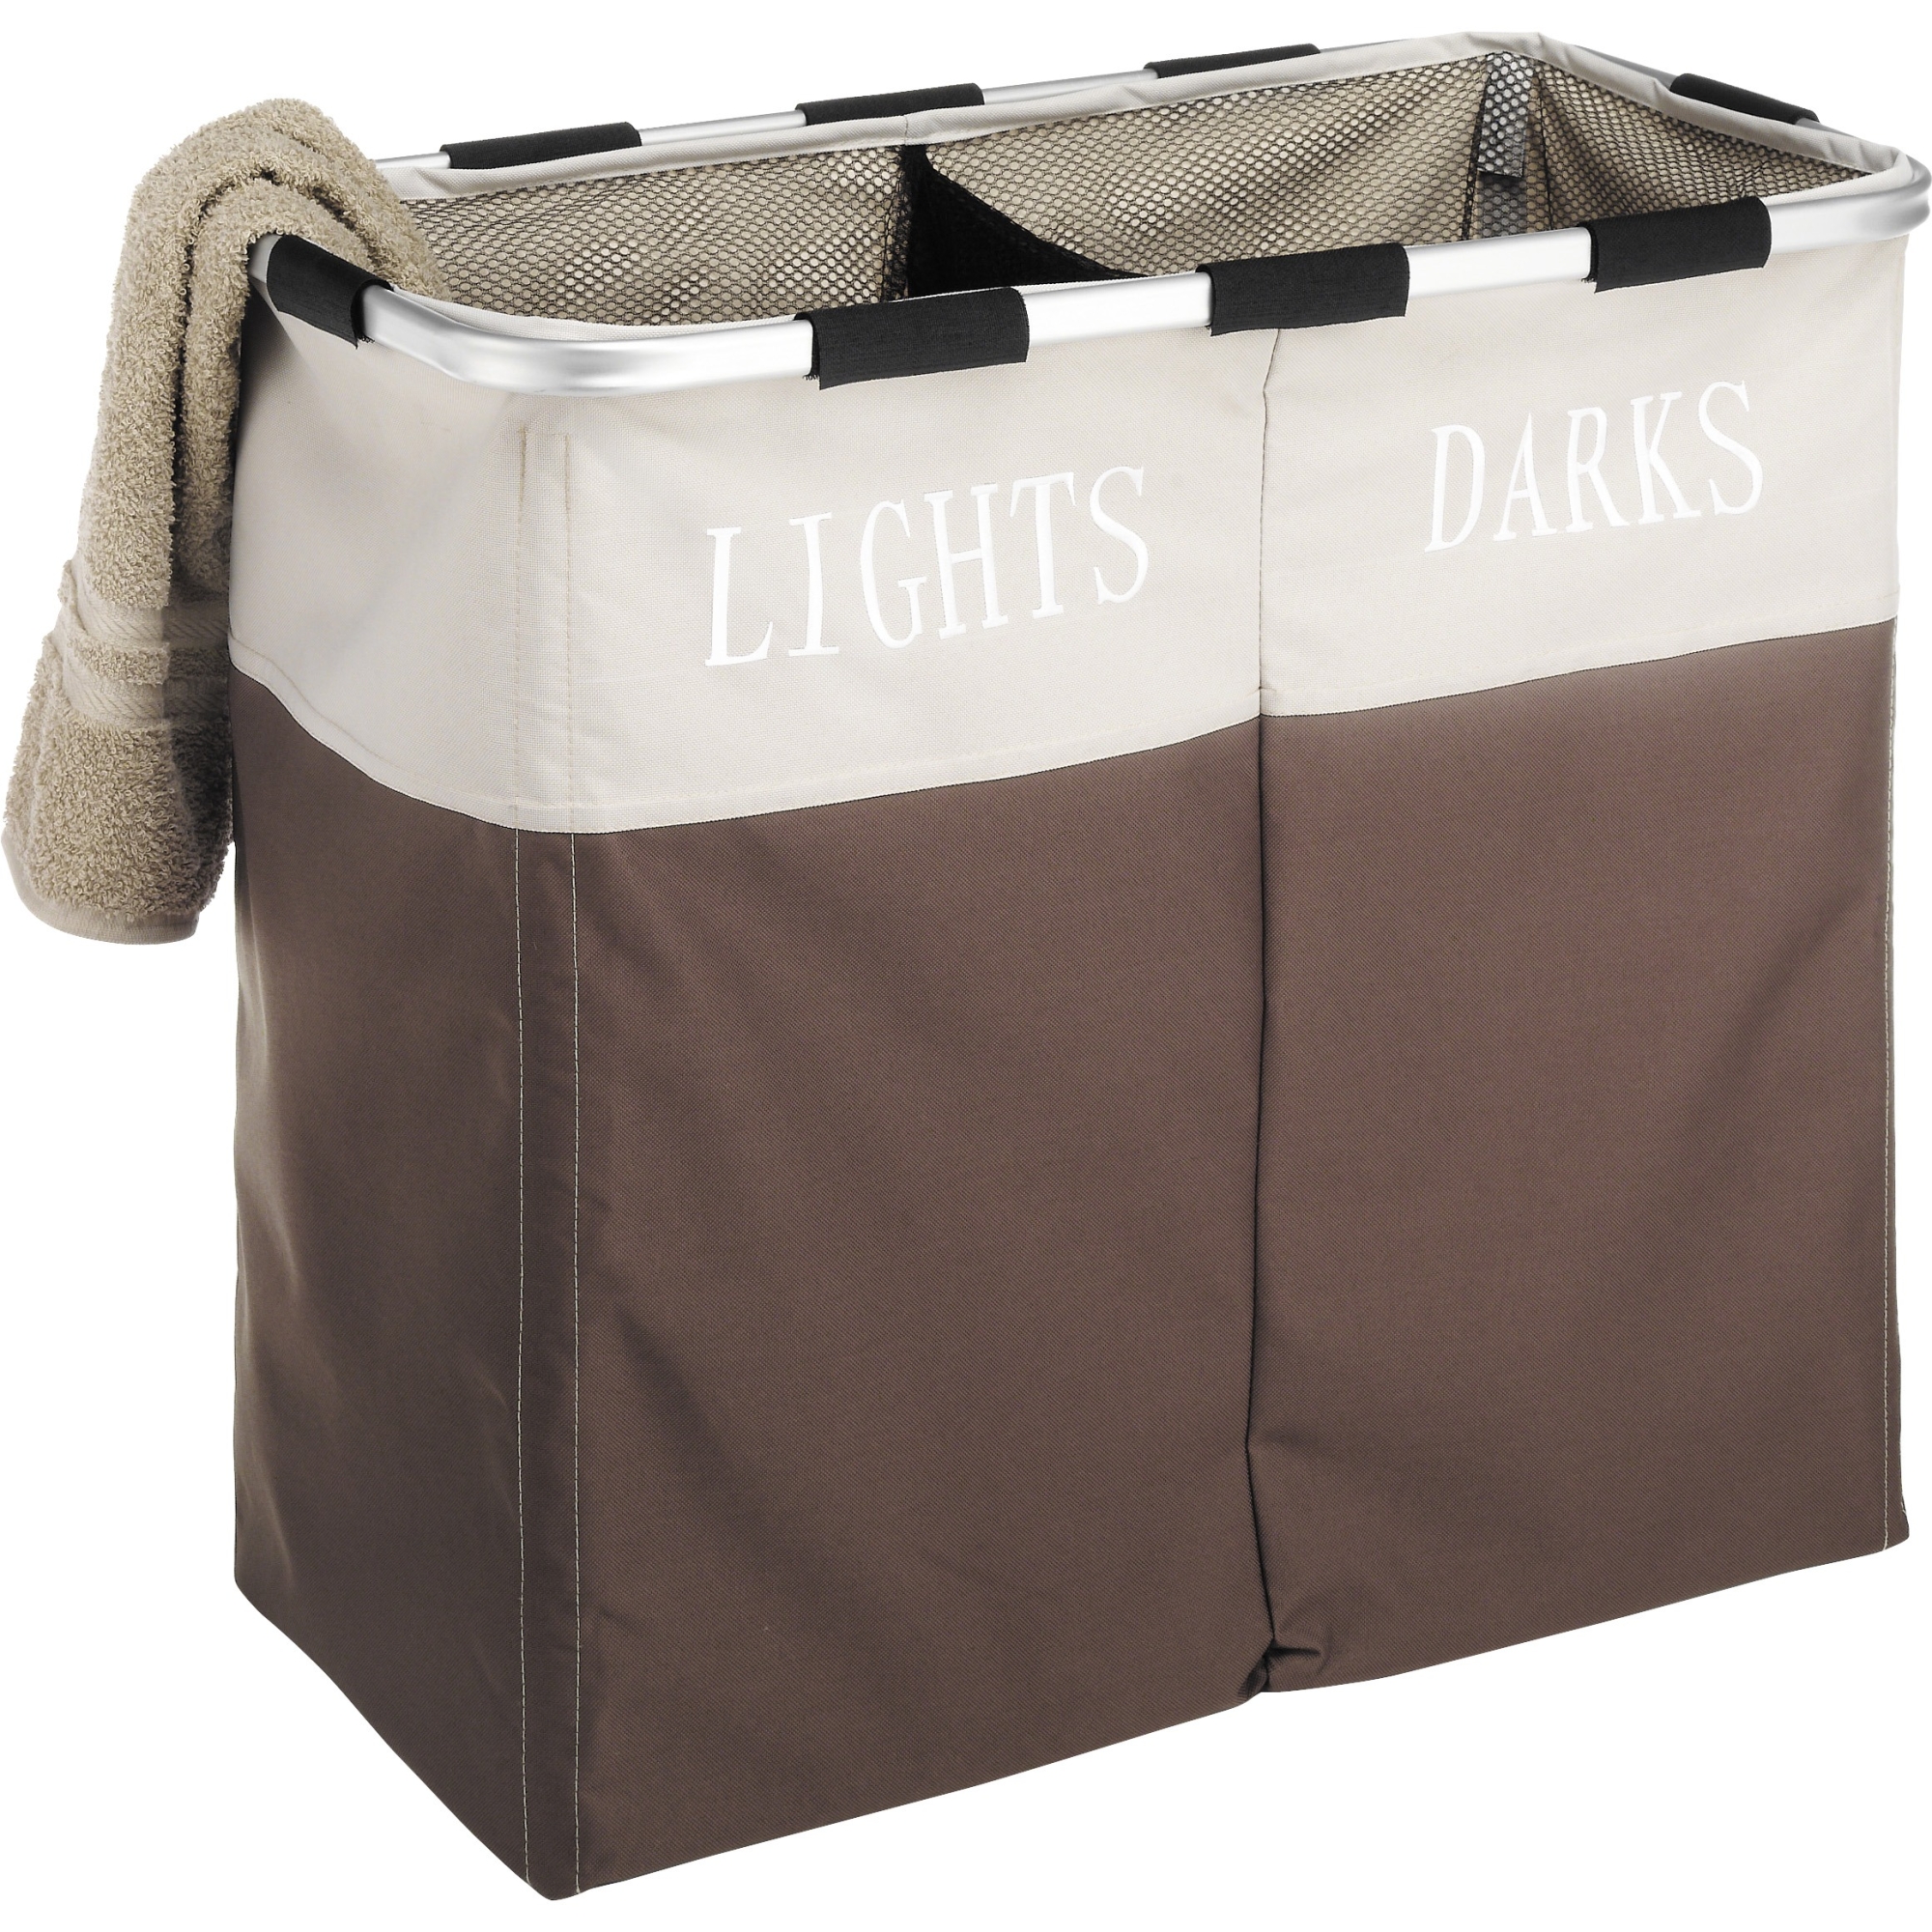 Whitmor Easycare Polyester Double Laundry Hamper - Lights and Darks Separator - Java - For Adult Use - image 1 of 7